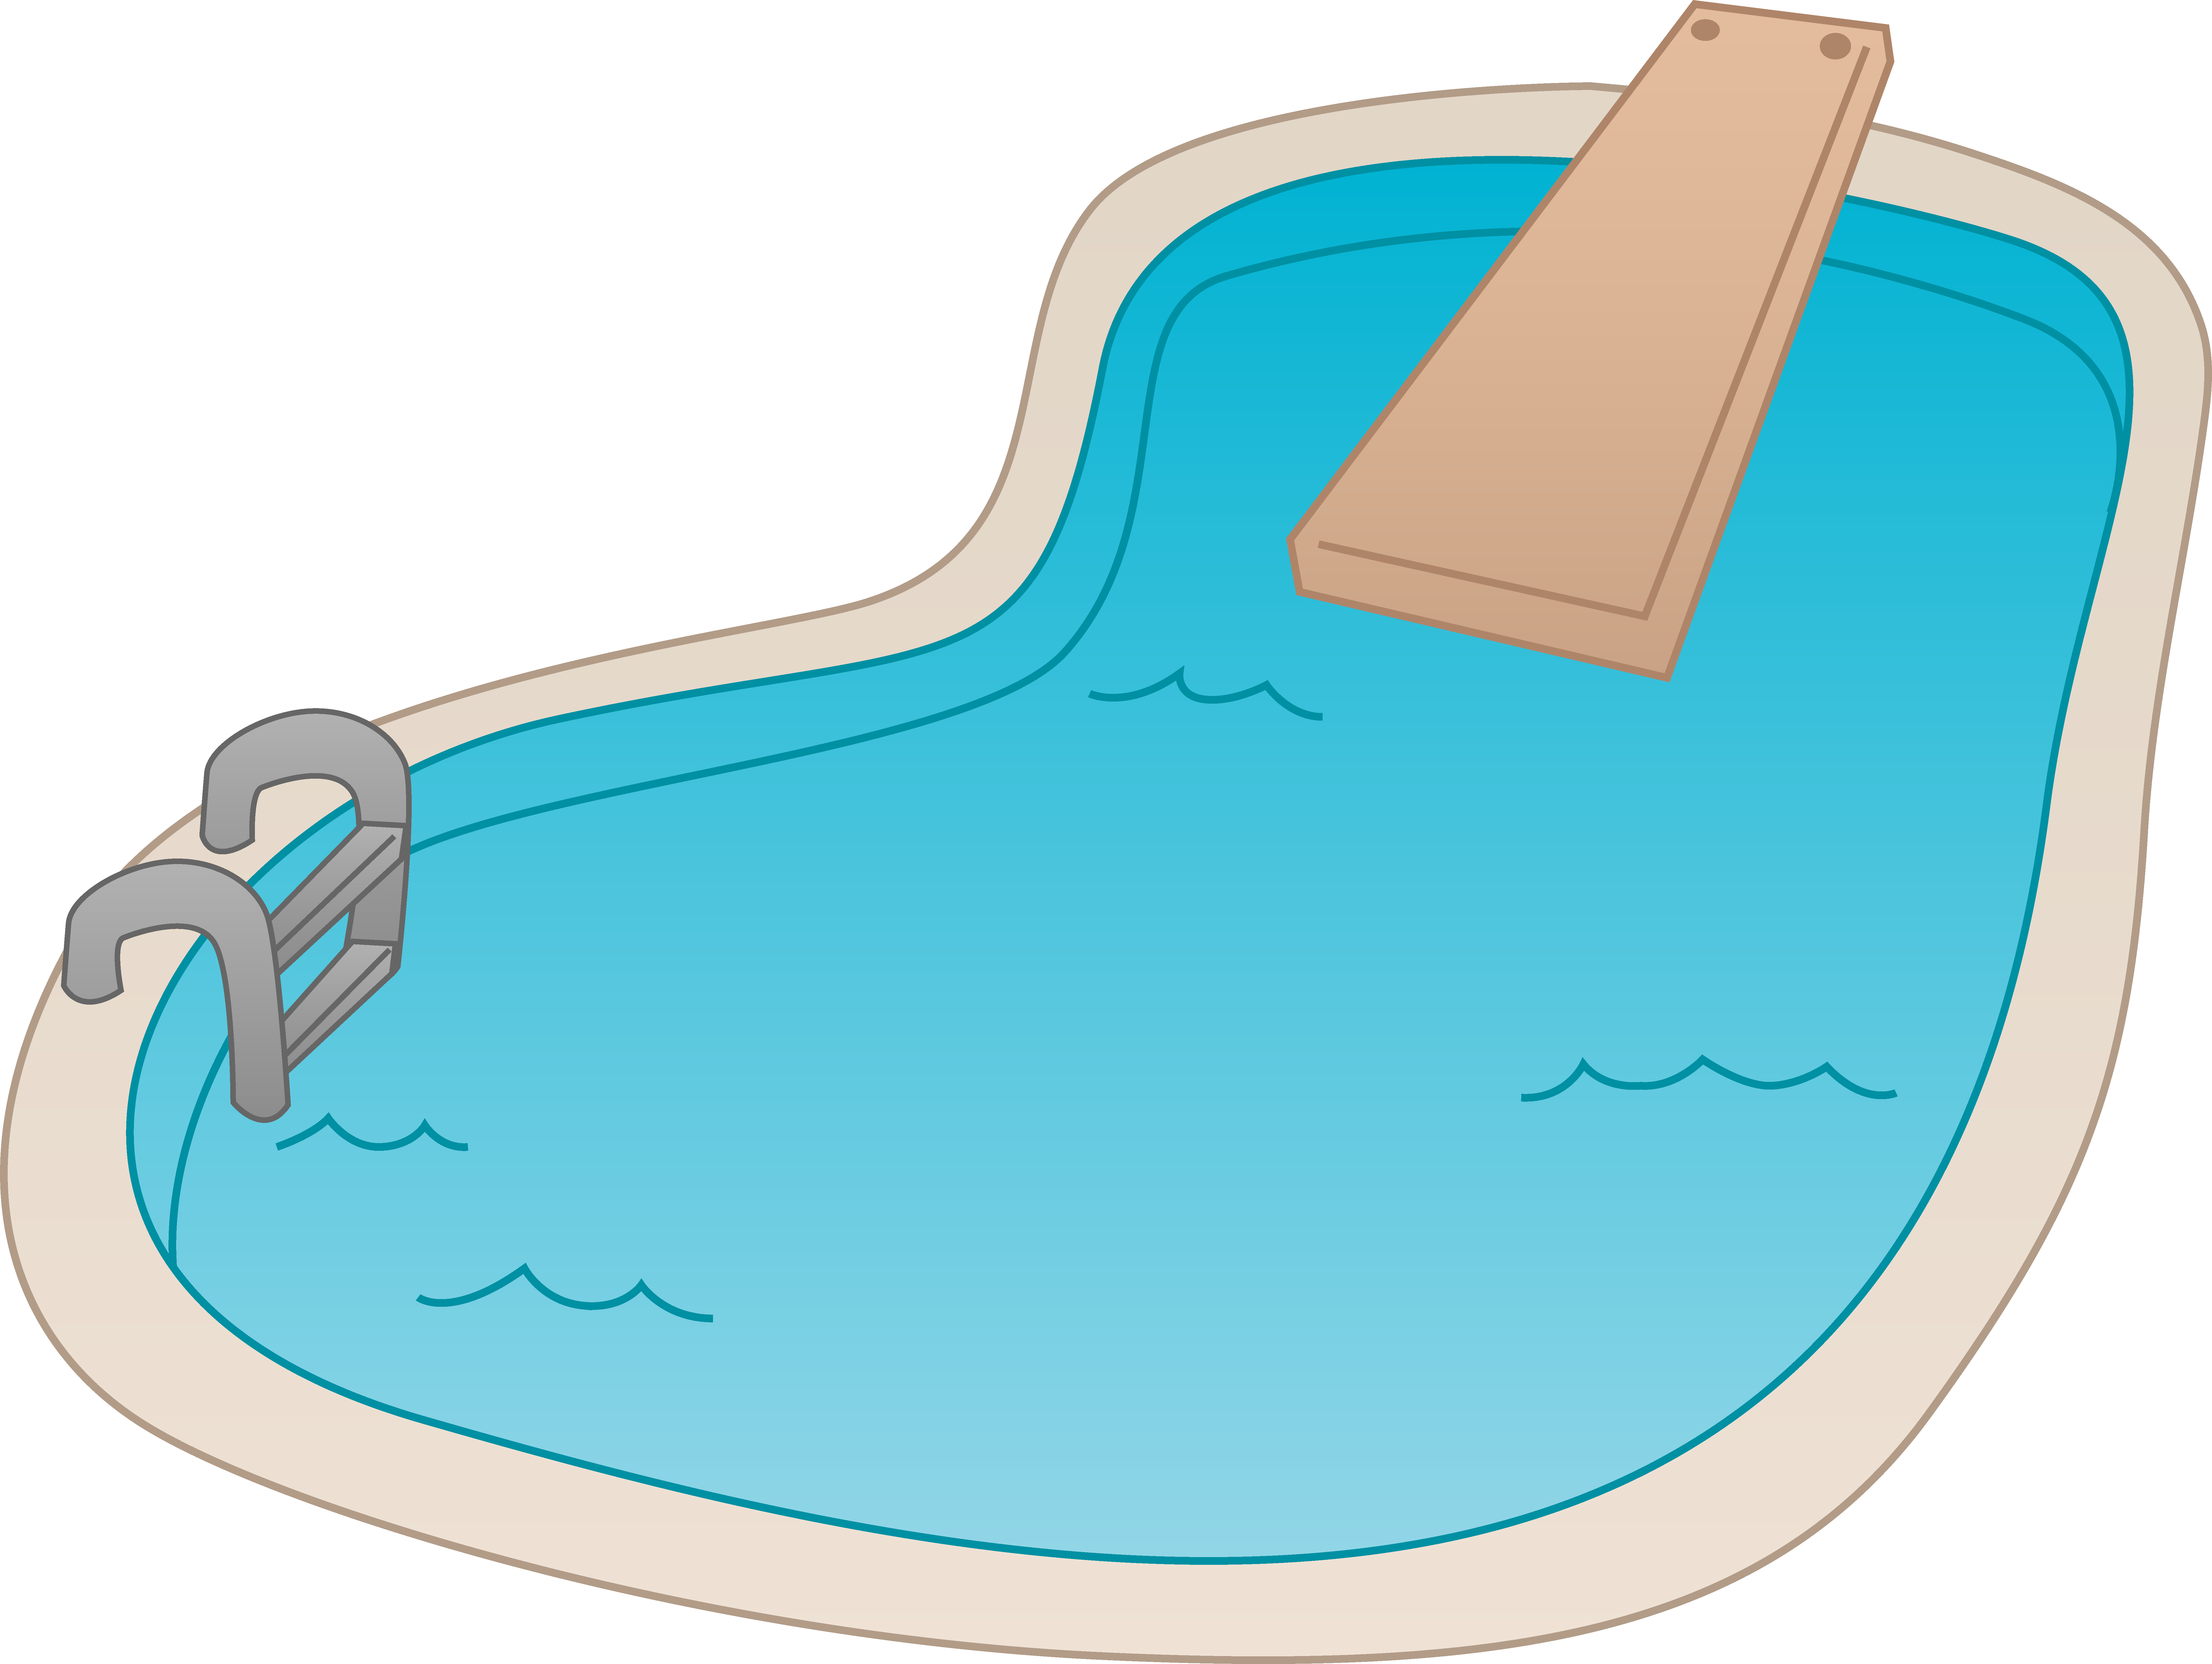 Swimming Pool Cartoon Imagesswimming Pool With Diving Board Free    